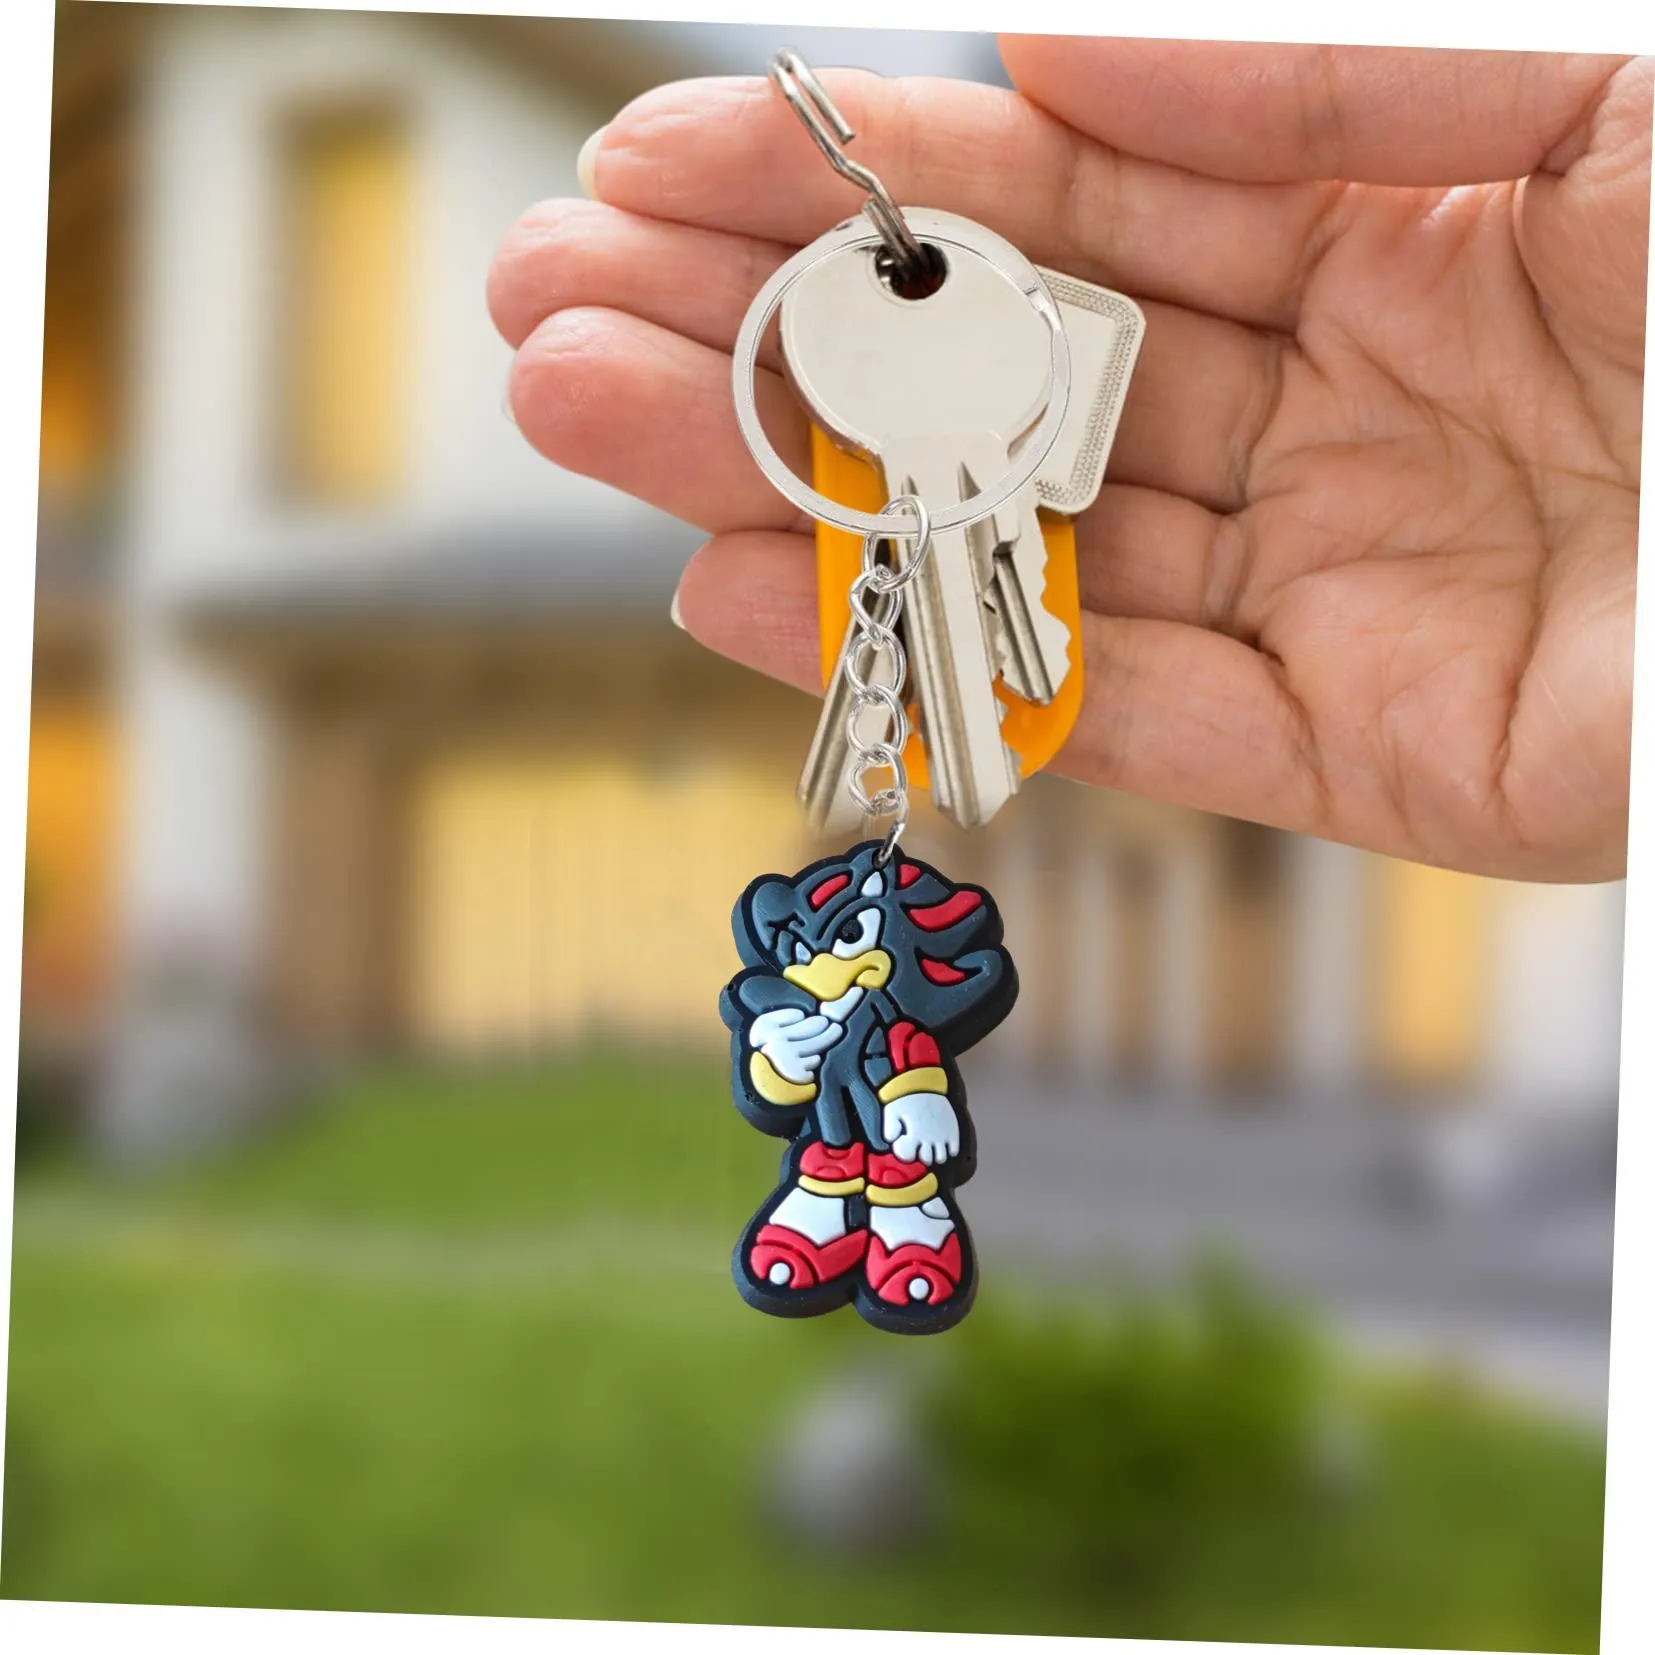 sonic keychain keychains party favors keyrings for bags backpack shoulder bag pendant accessories charm keyring suitable schoolbag cool colorful anime character with wristlet key chain ring christmas gift fans school day birthday supplies